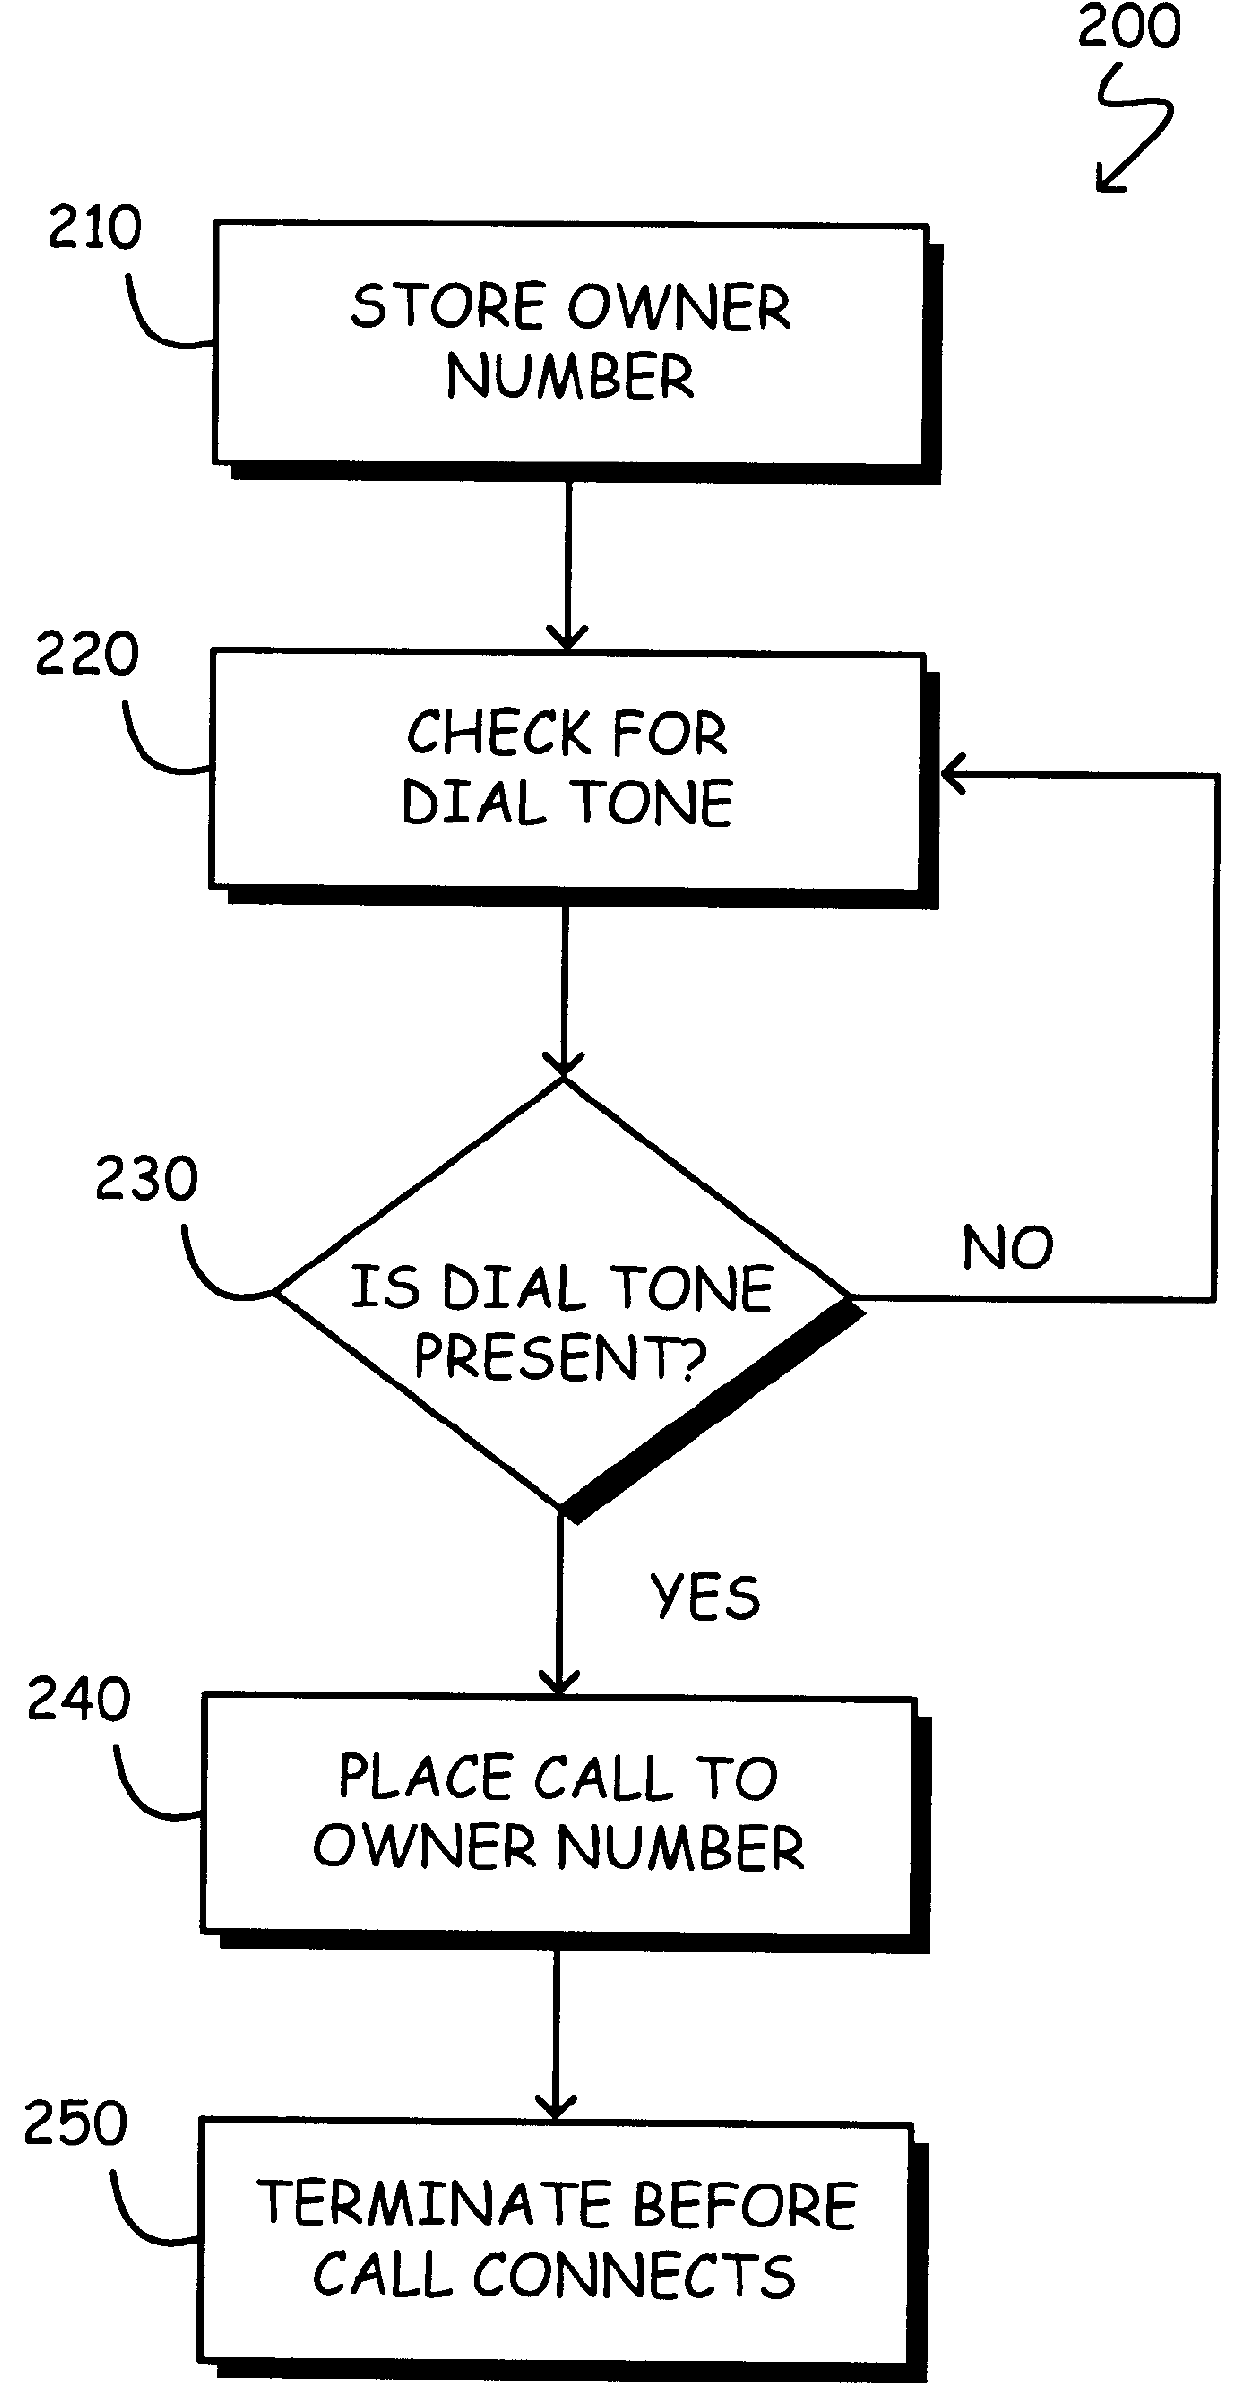 Method and apparatus for locating a stolen electronic device using automatic number identification